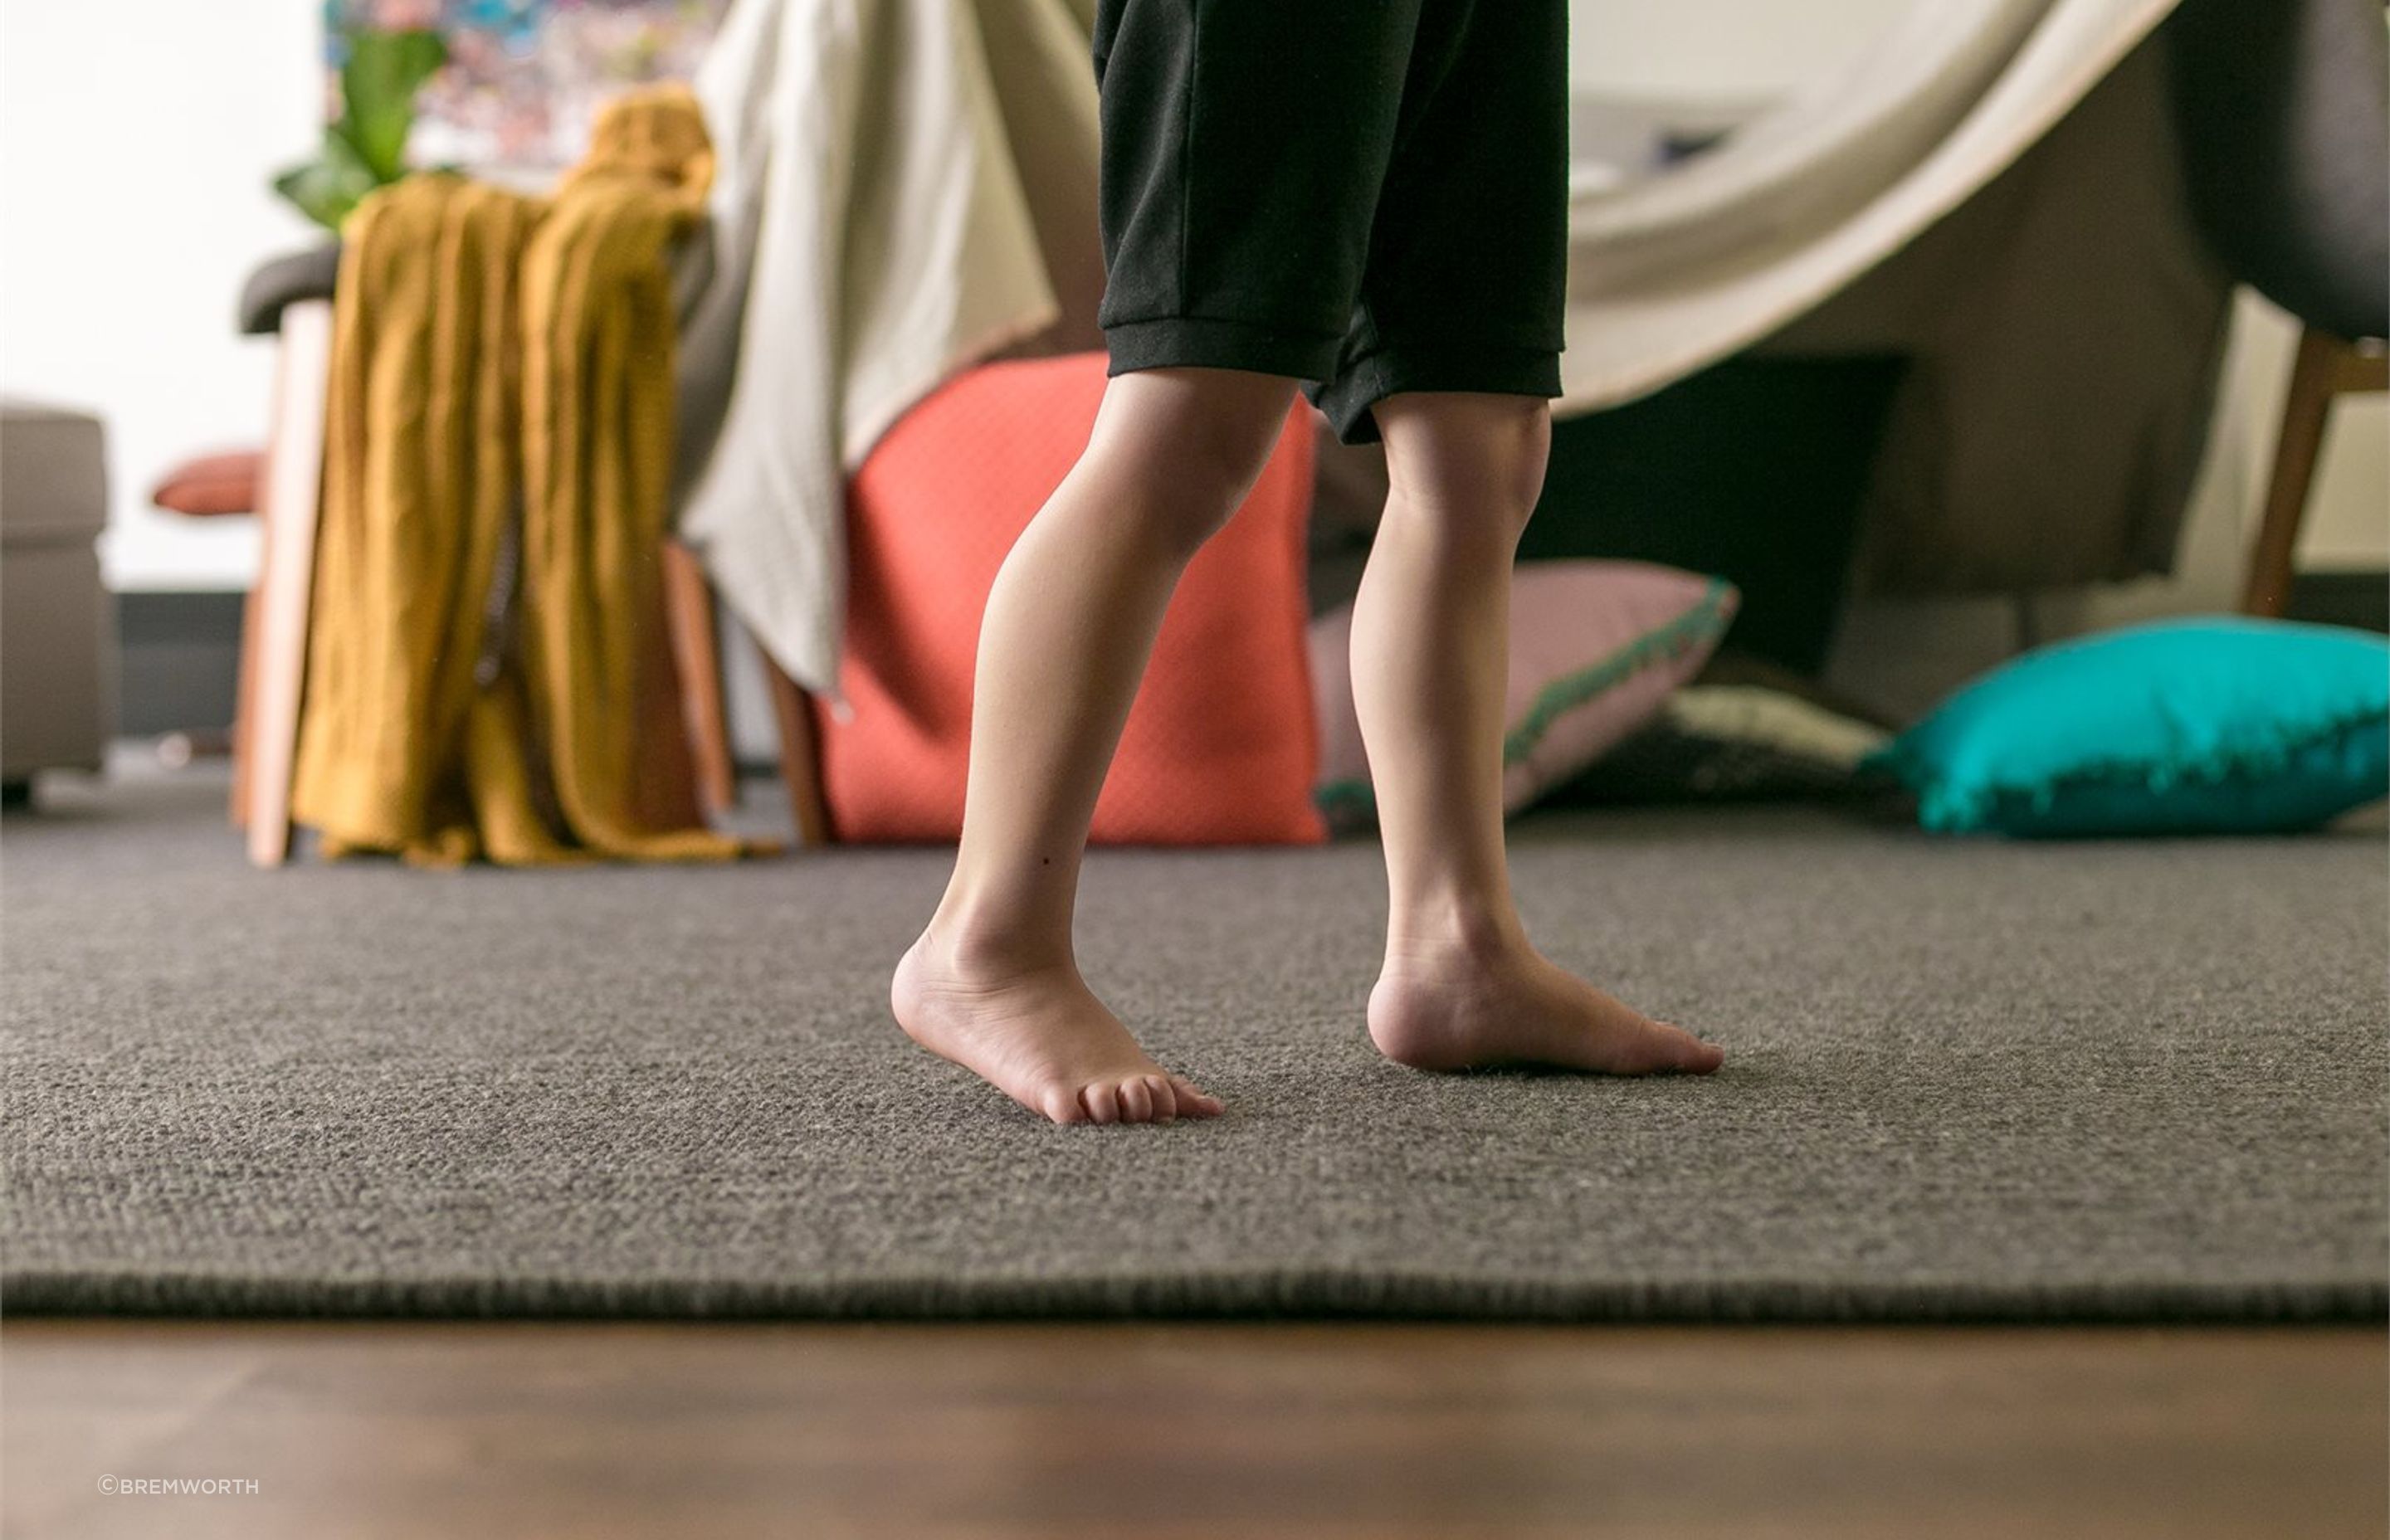 Dark coloured rugs like the Untouched Rug are often a solid practical choice when kids and pets are involved